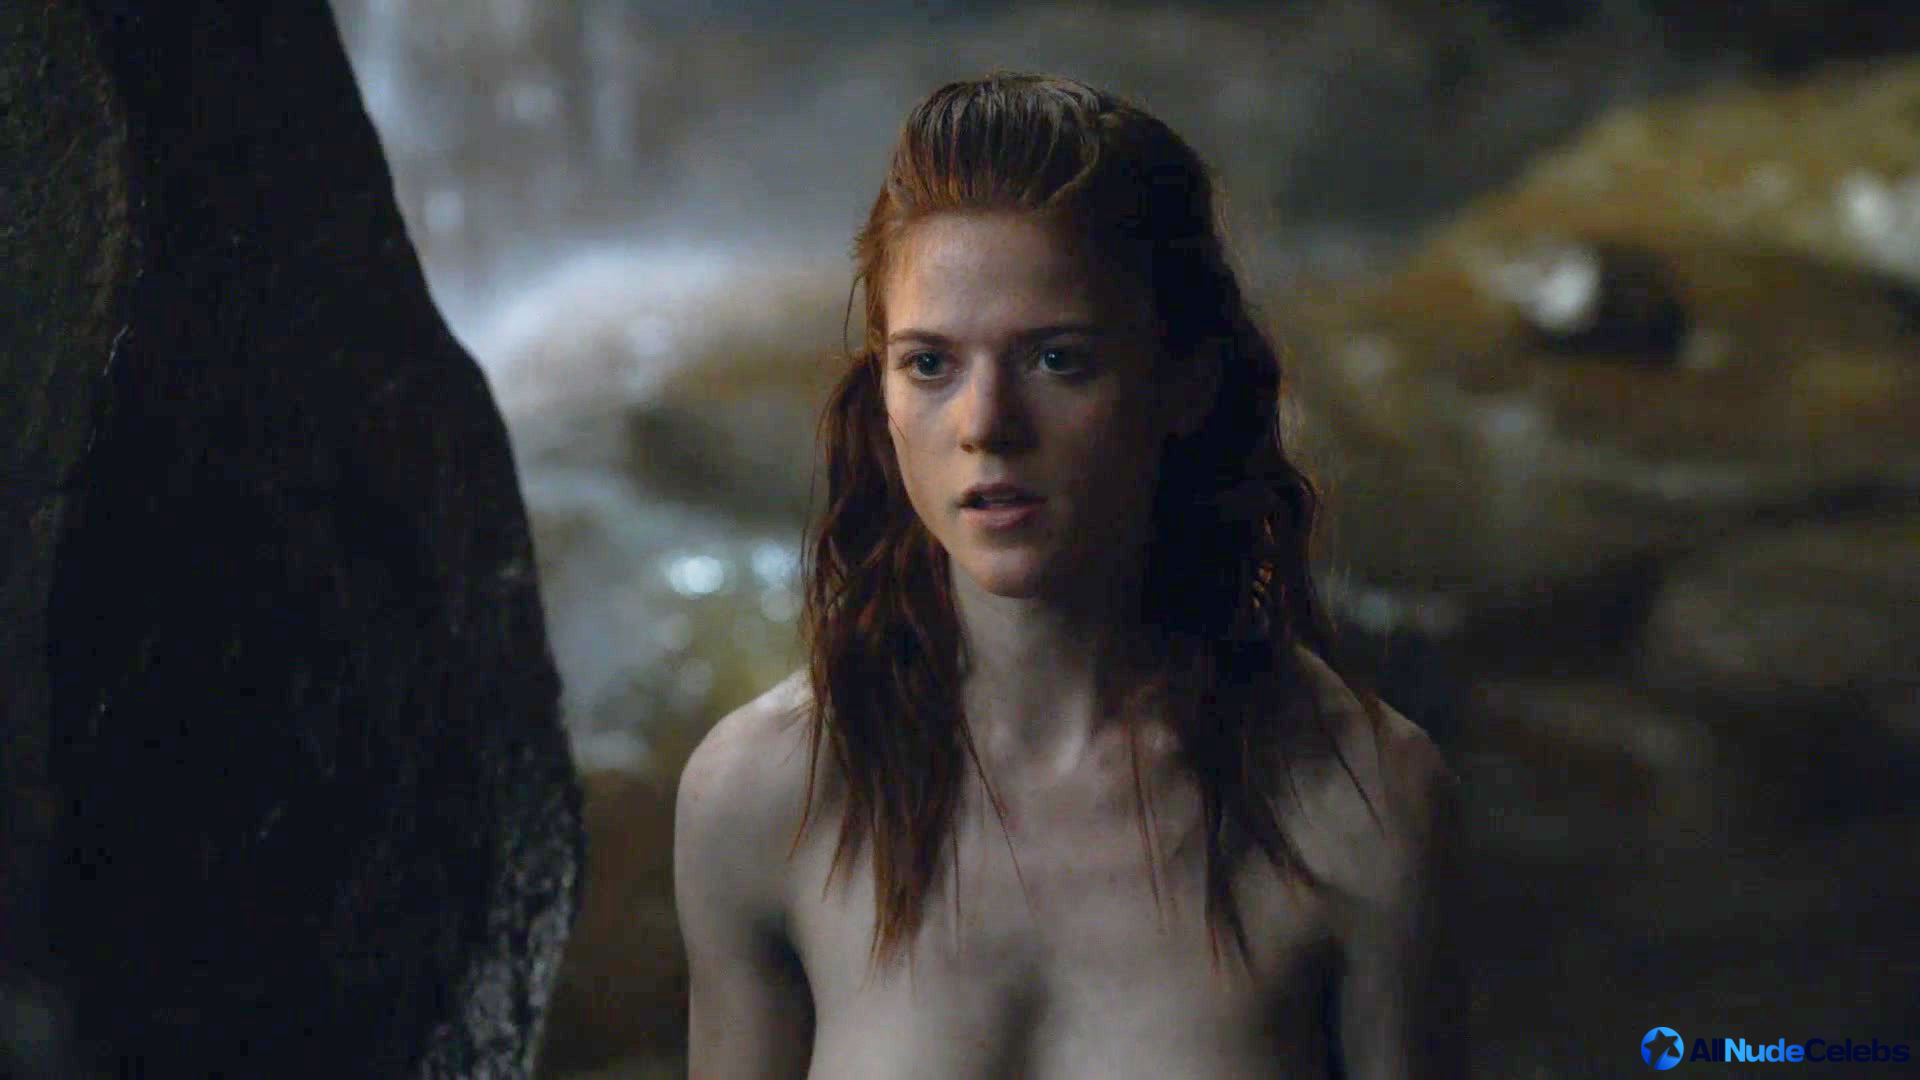 Well, Rose Leslie feels absolutely confident appearing nude in some of the ...